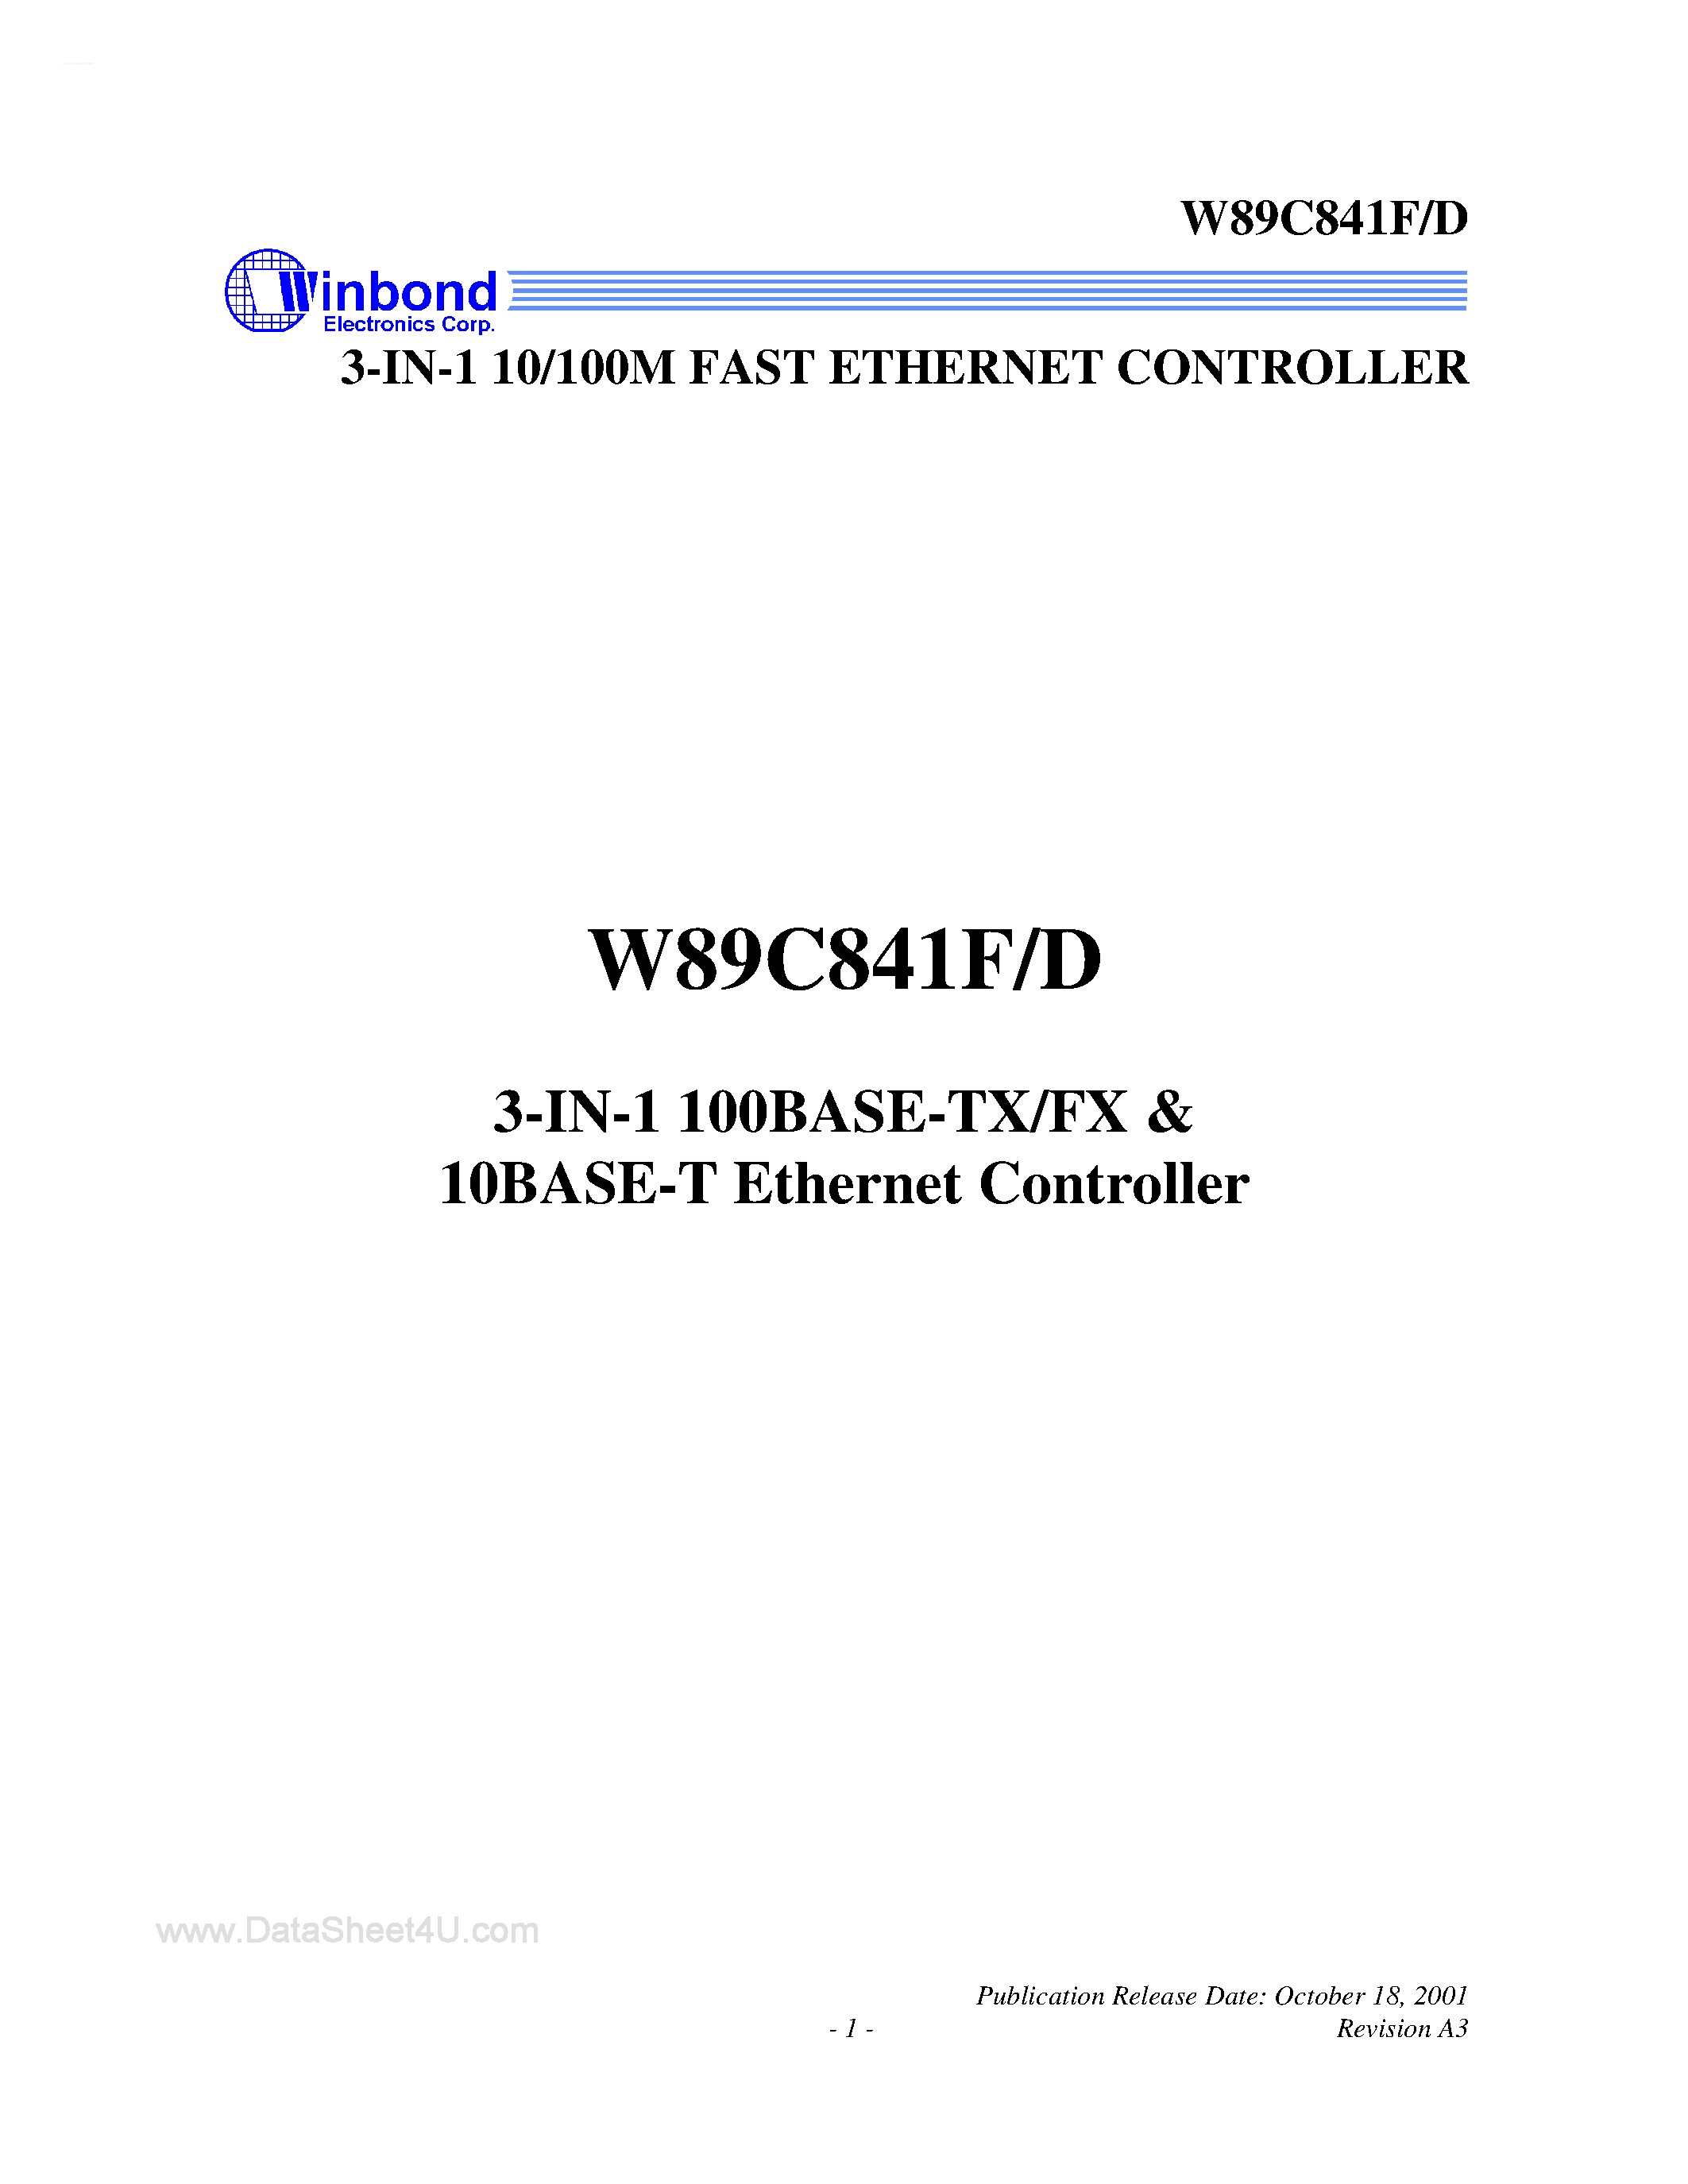 Datasheet W89C841F - 3-IN - 1 10/100M FAST ETHERNET CONTROLLER page 1